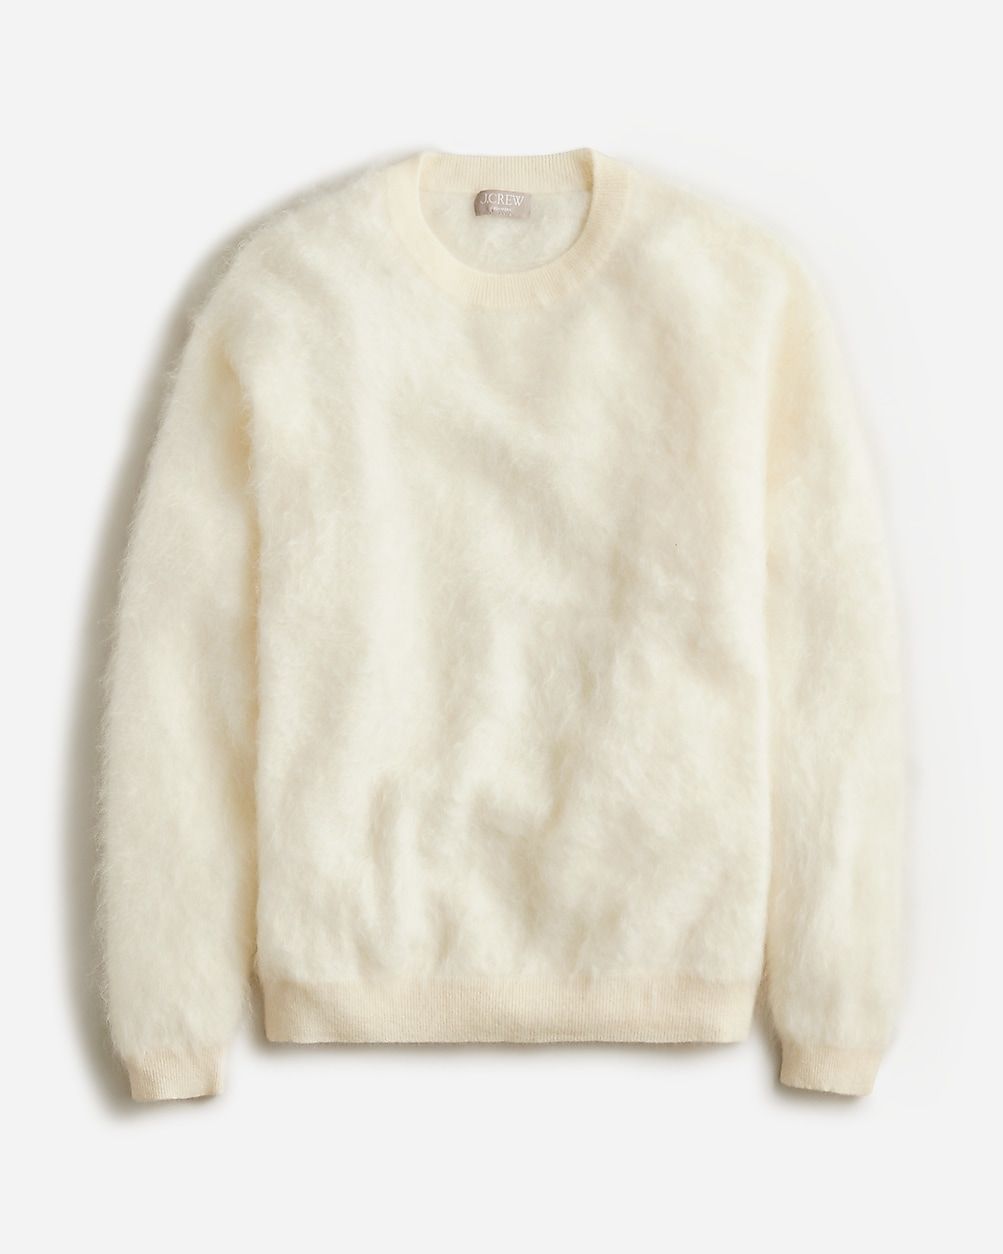 Brushed cashmere relaxed crewneck sweater | J.Crew US